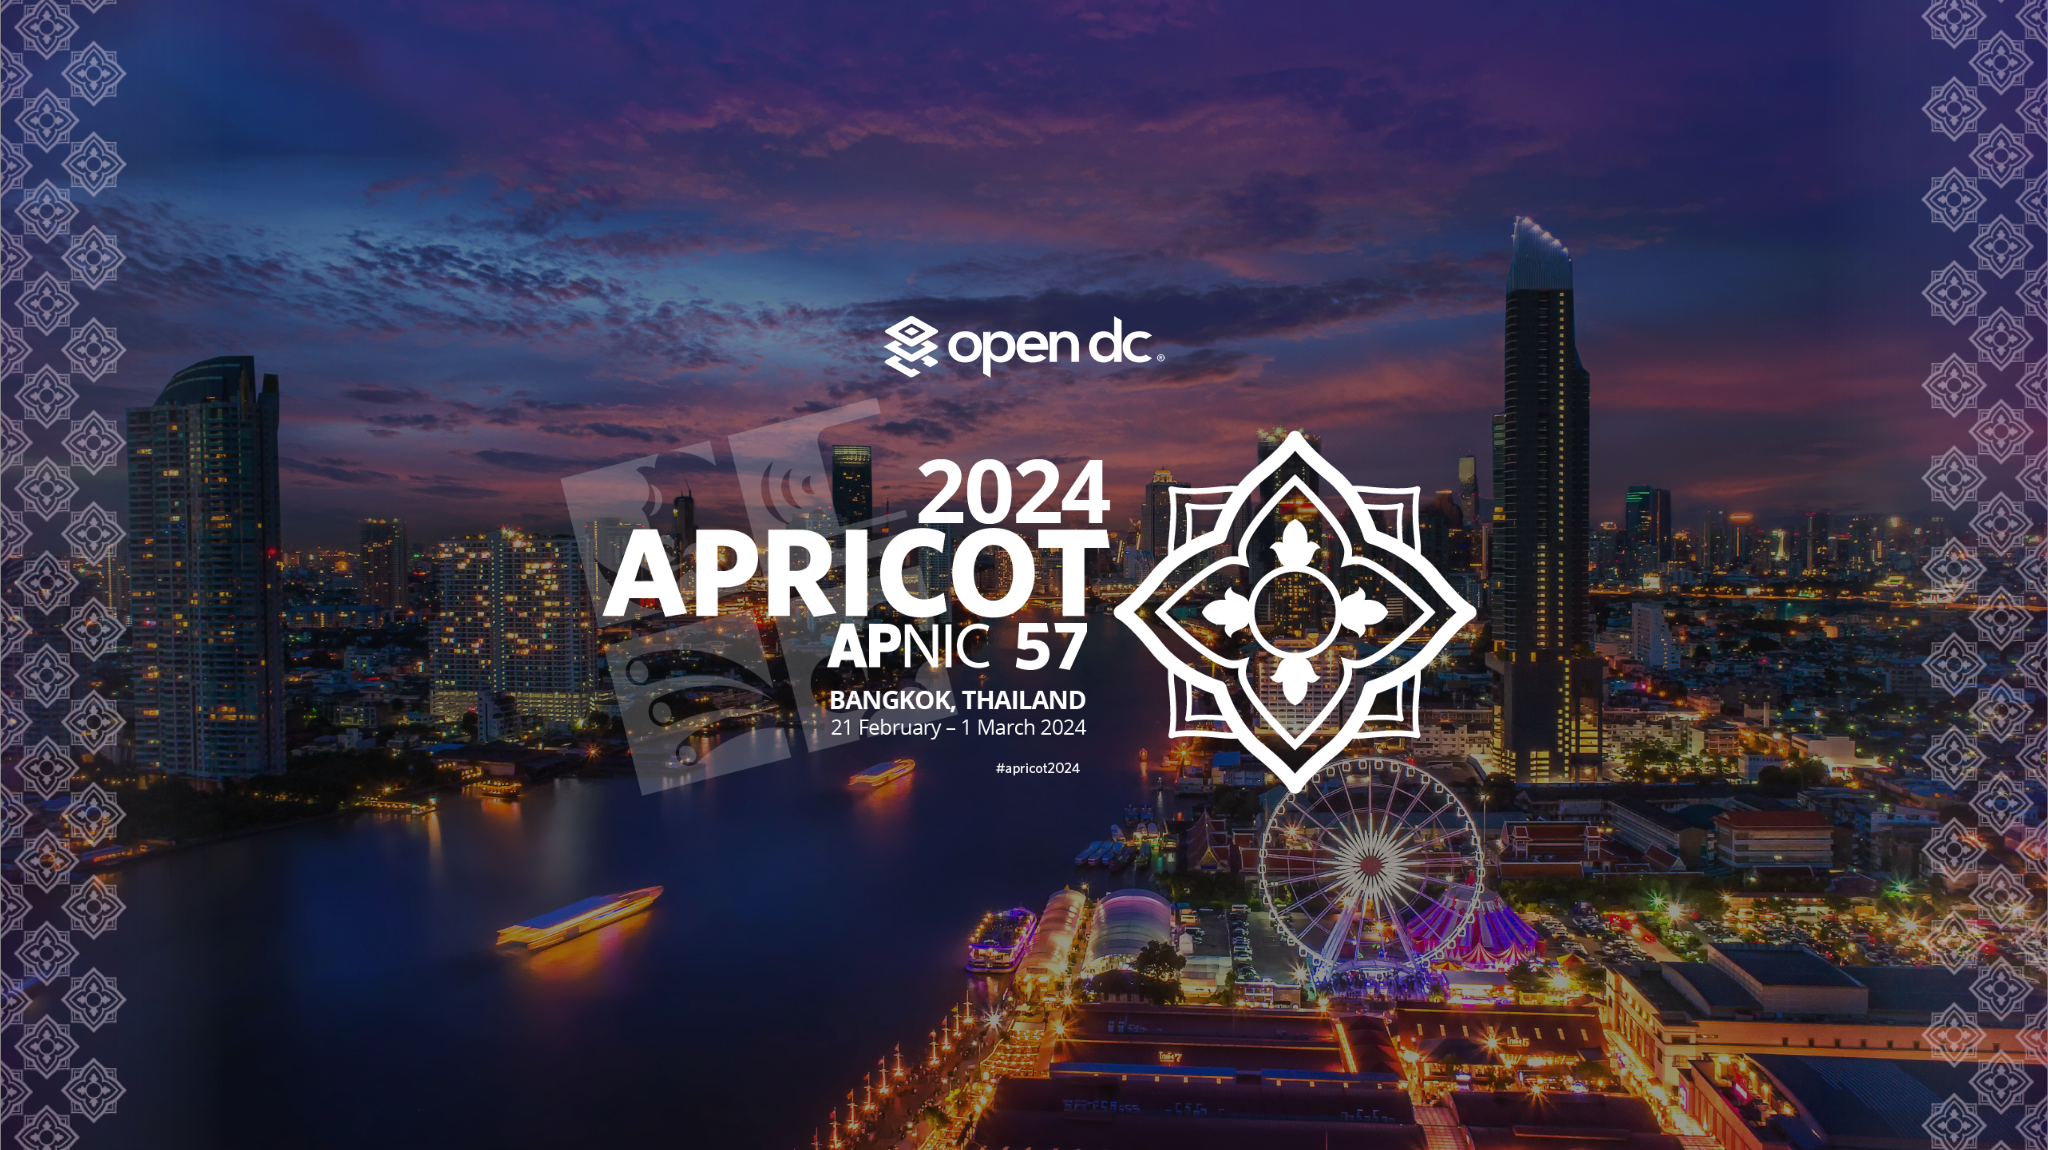 Open DC at APRICOT 2024